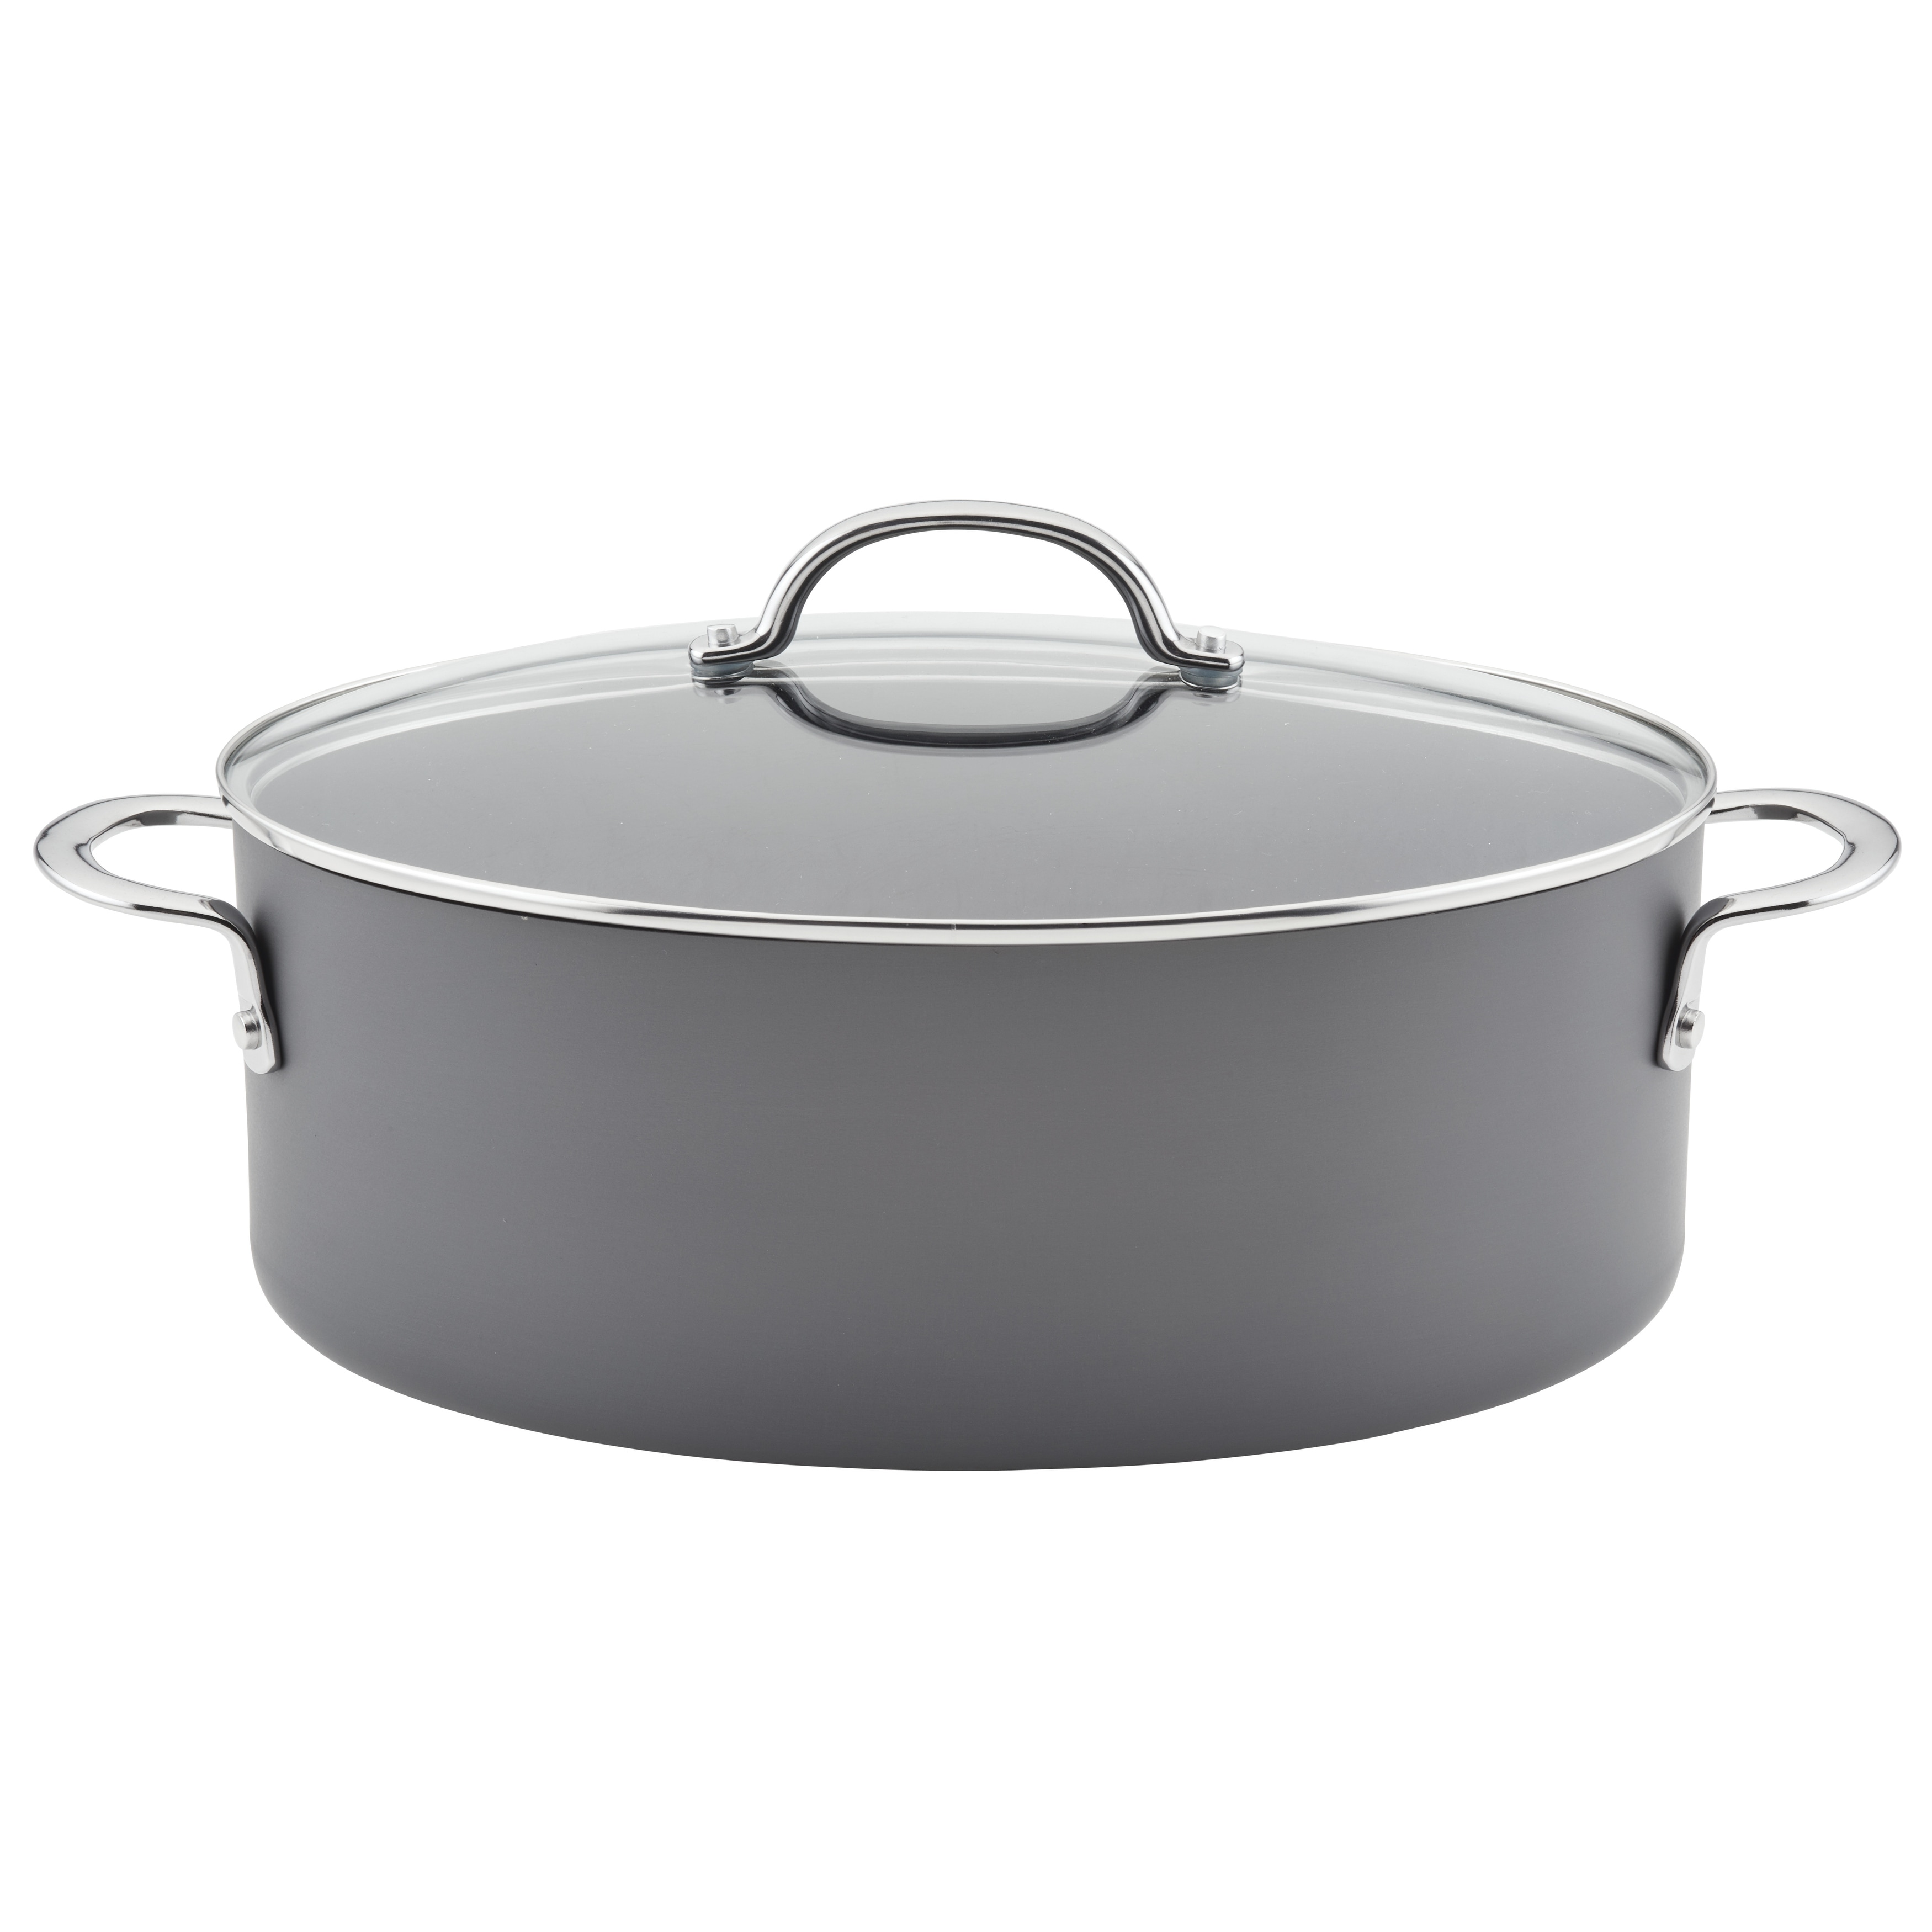 https://ak1.ostkcdn.com/images/products/is/images/direct/70b7c564bc8160f0318c7dcdb46ddfde904098a7/Rachael-Ray-Hard-Anodized-Nonstick-Cookware-Oval-Pasta-Stockpot-and-Braiser%2C-8-Quart%2C-Gray.jpg